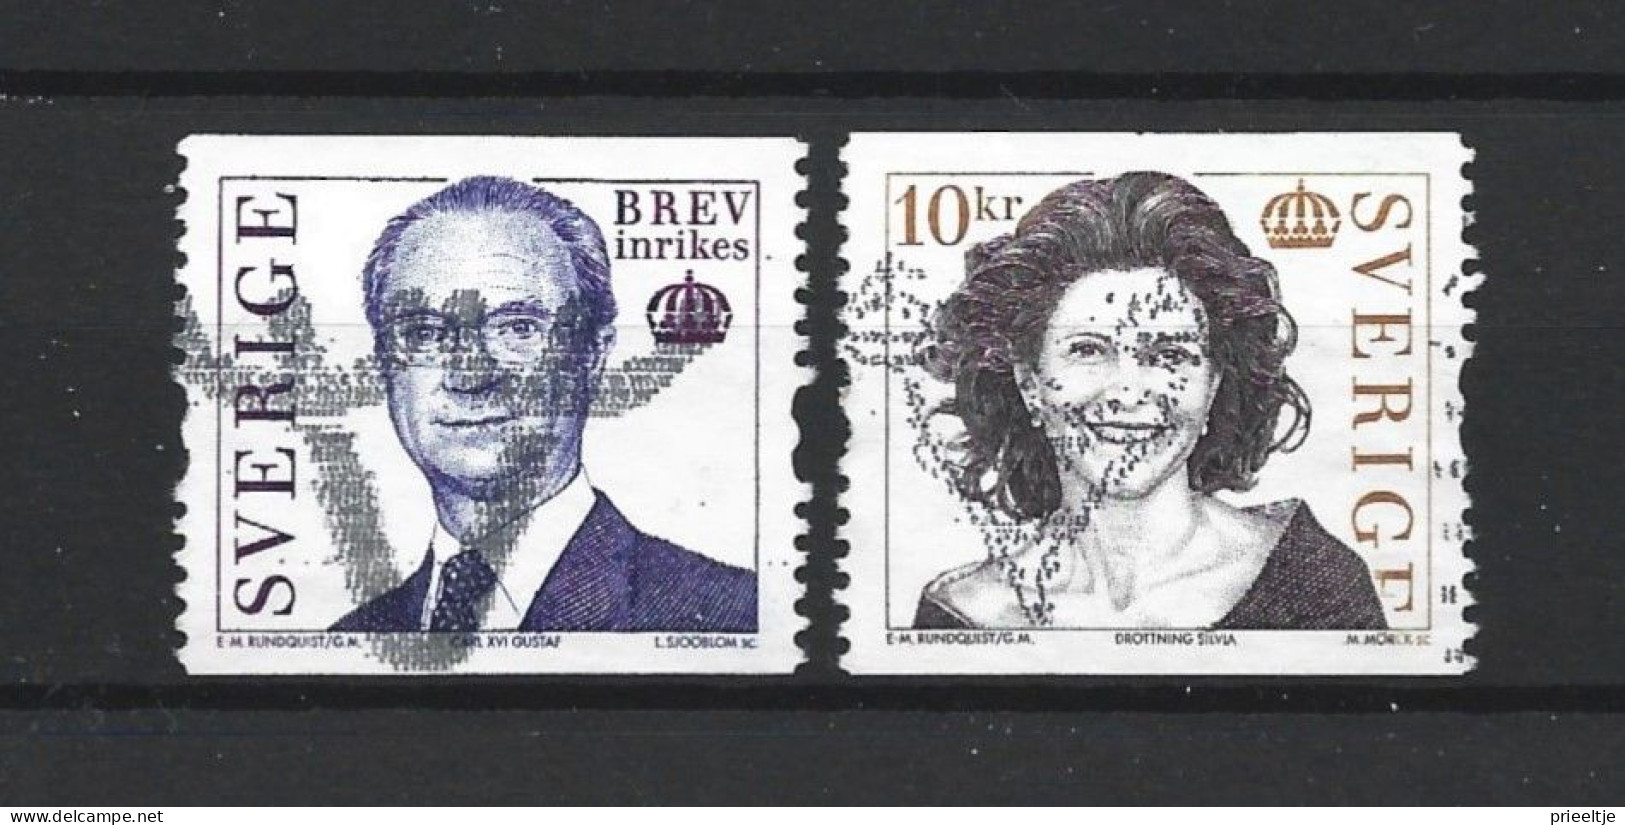 Sweden 2004 King & Queen  Y.T. 2429/2430 (0) - Used Stamps